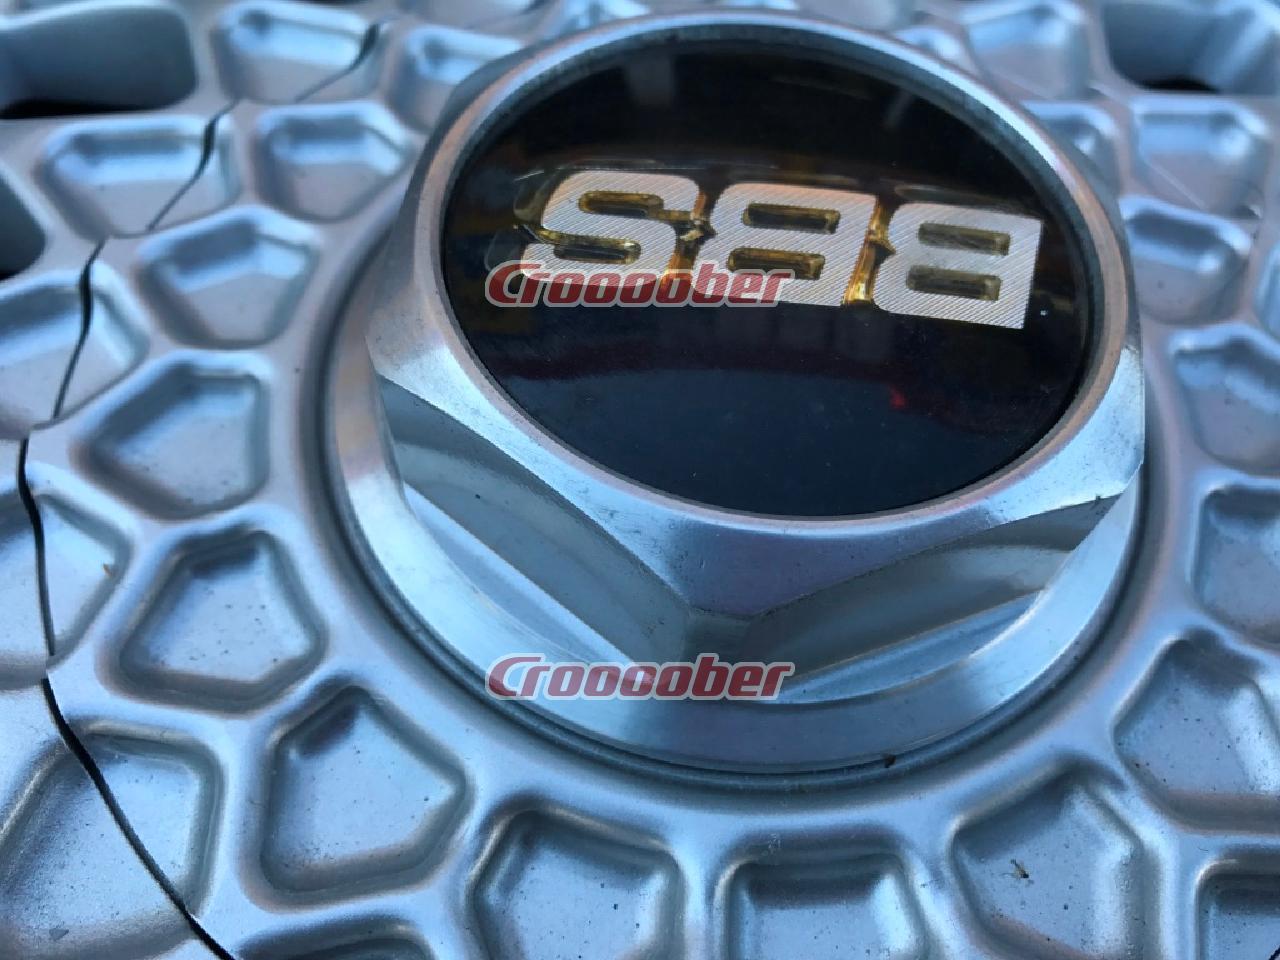 BBS RS RS137 4/4 - 7.0Jx16+45114.3-5H for Sale | Croooober